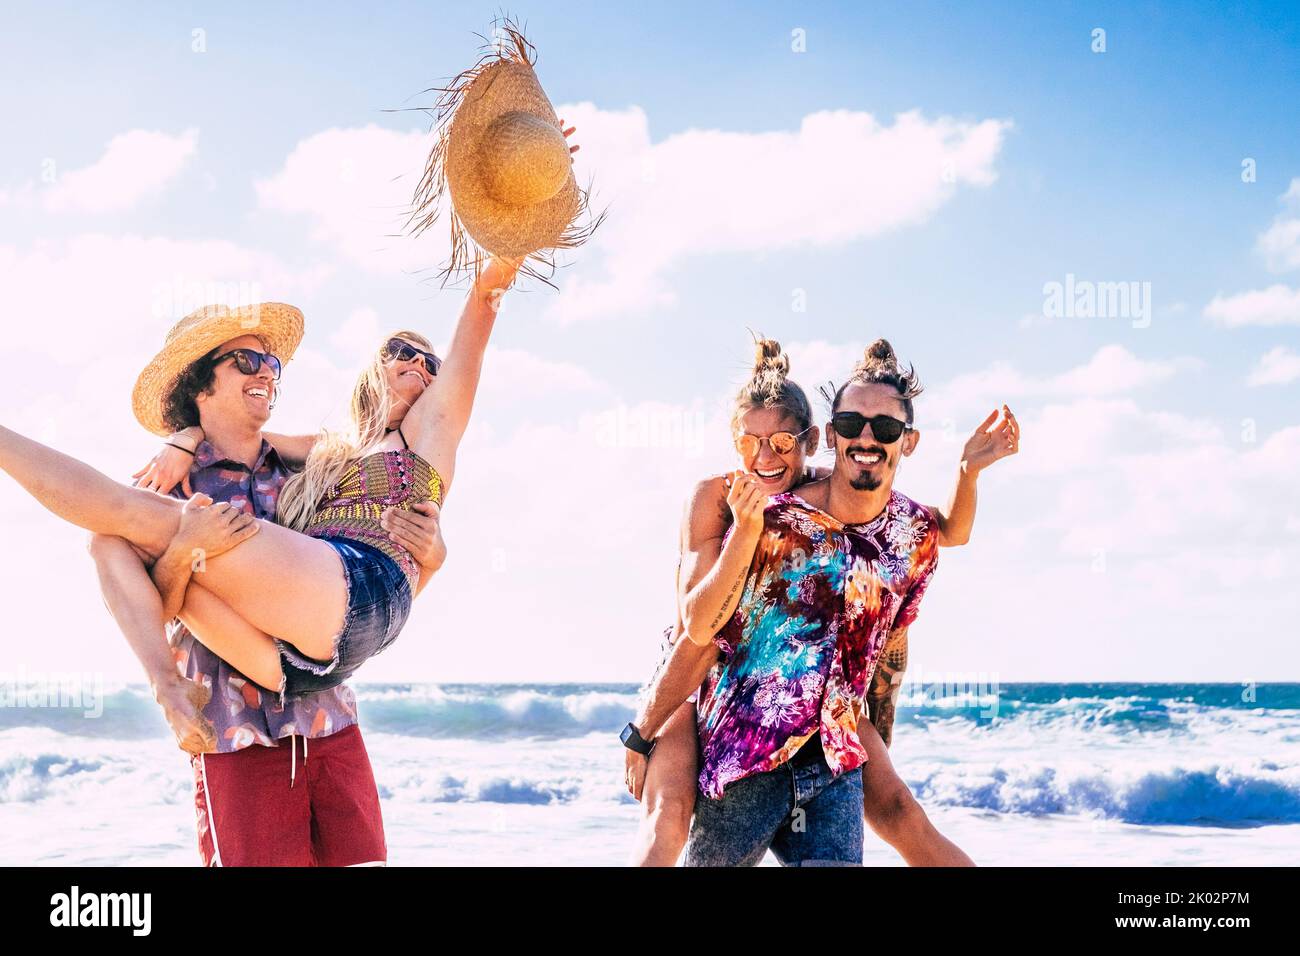 Group of friends tourist have fun and play together at the beach with sea water in background. Cheerful and happy group of people in outdoor leisure activity in summer holiday vacation lifestyle Stock Photo